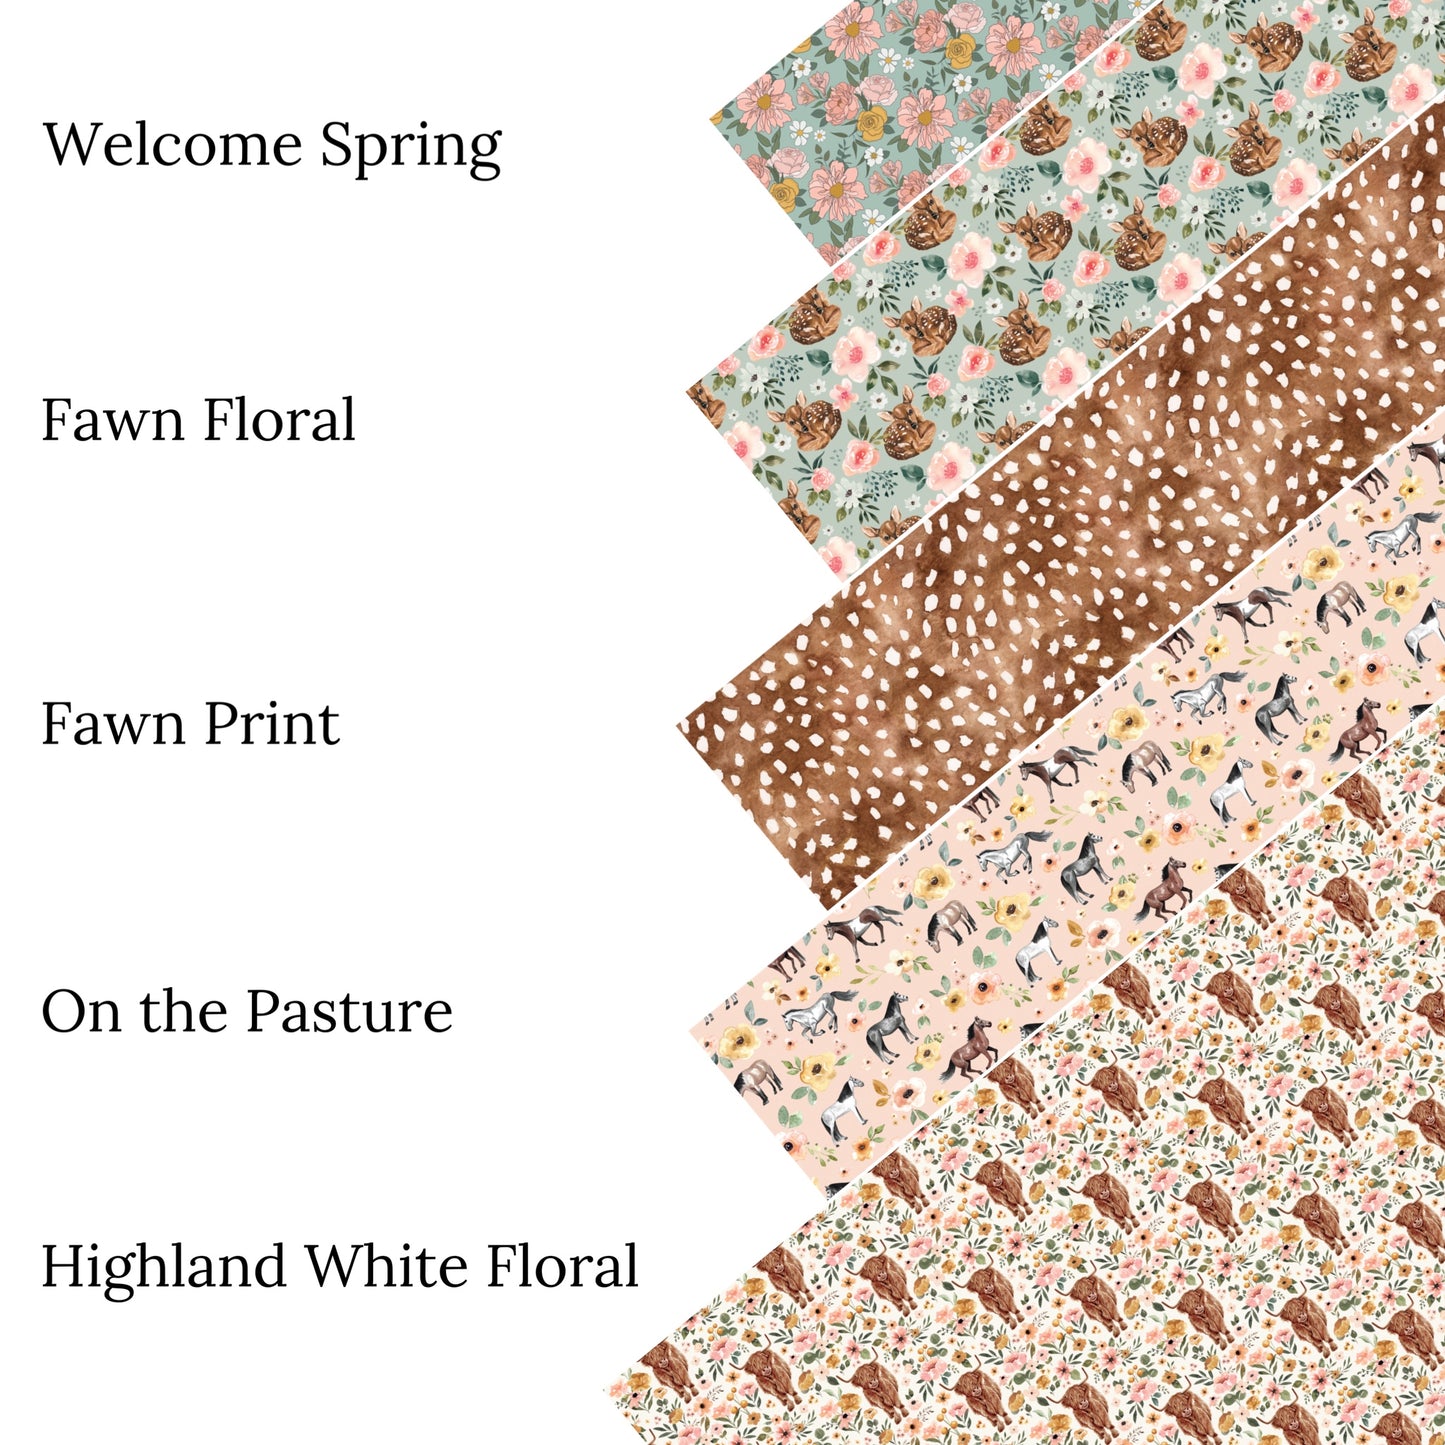 Fawn Floral Mint Faux Leather Sheets